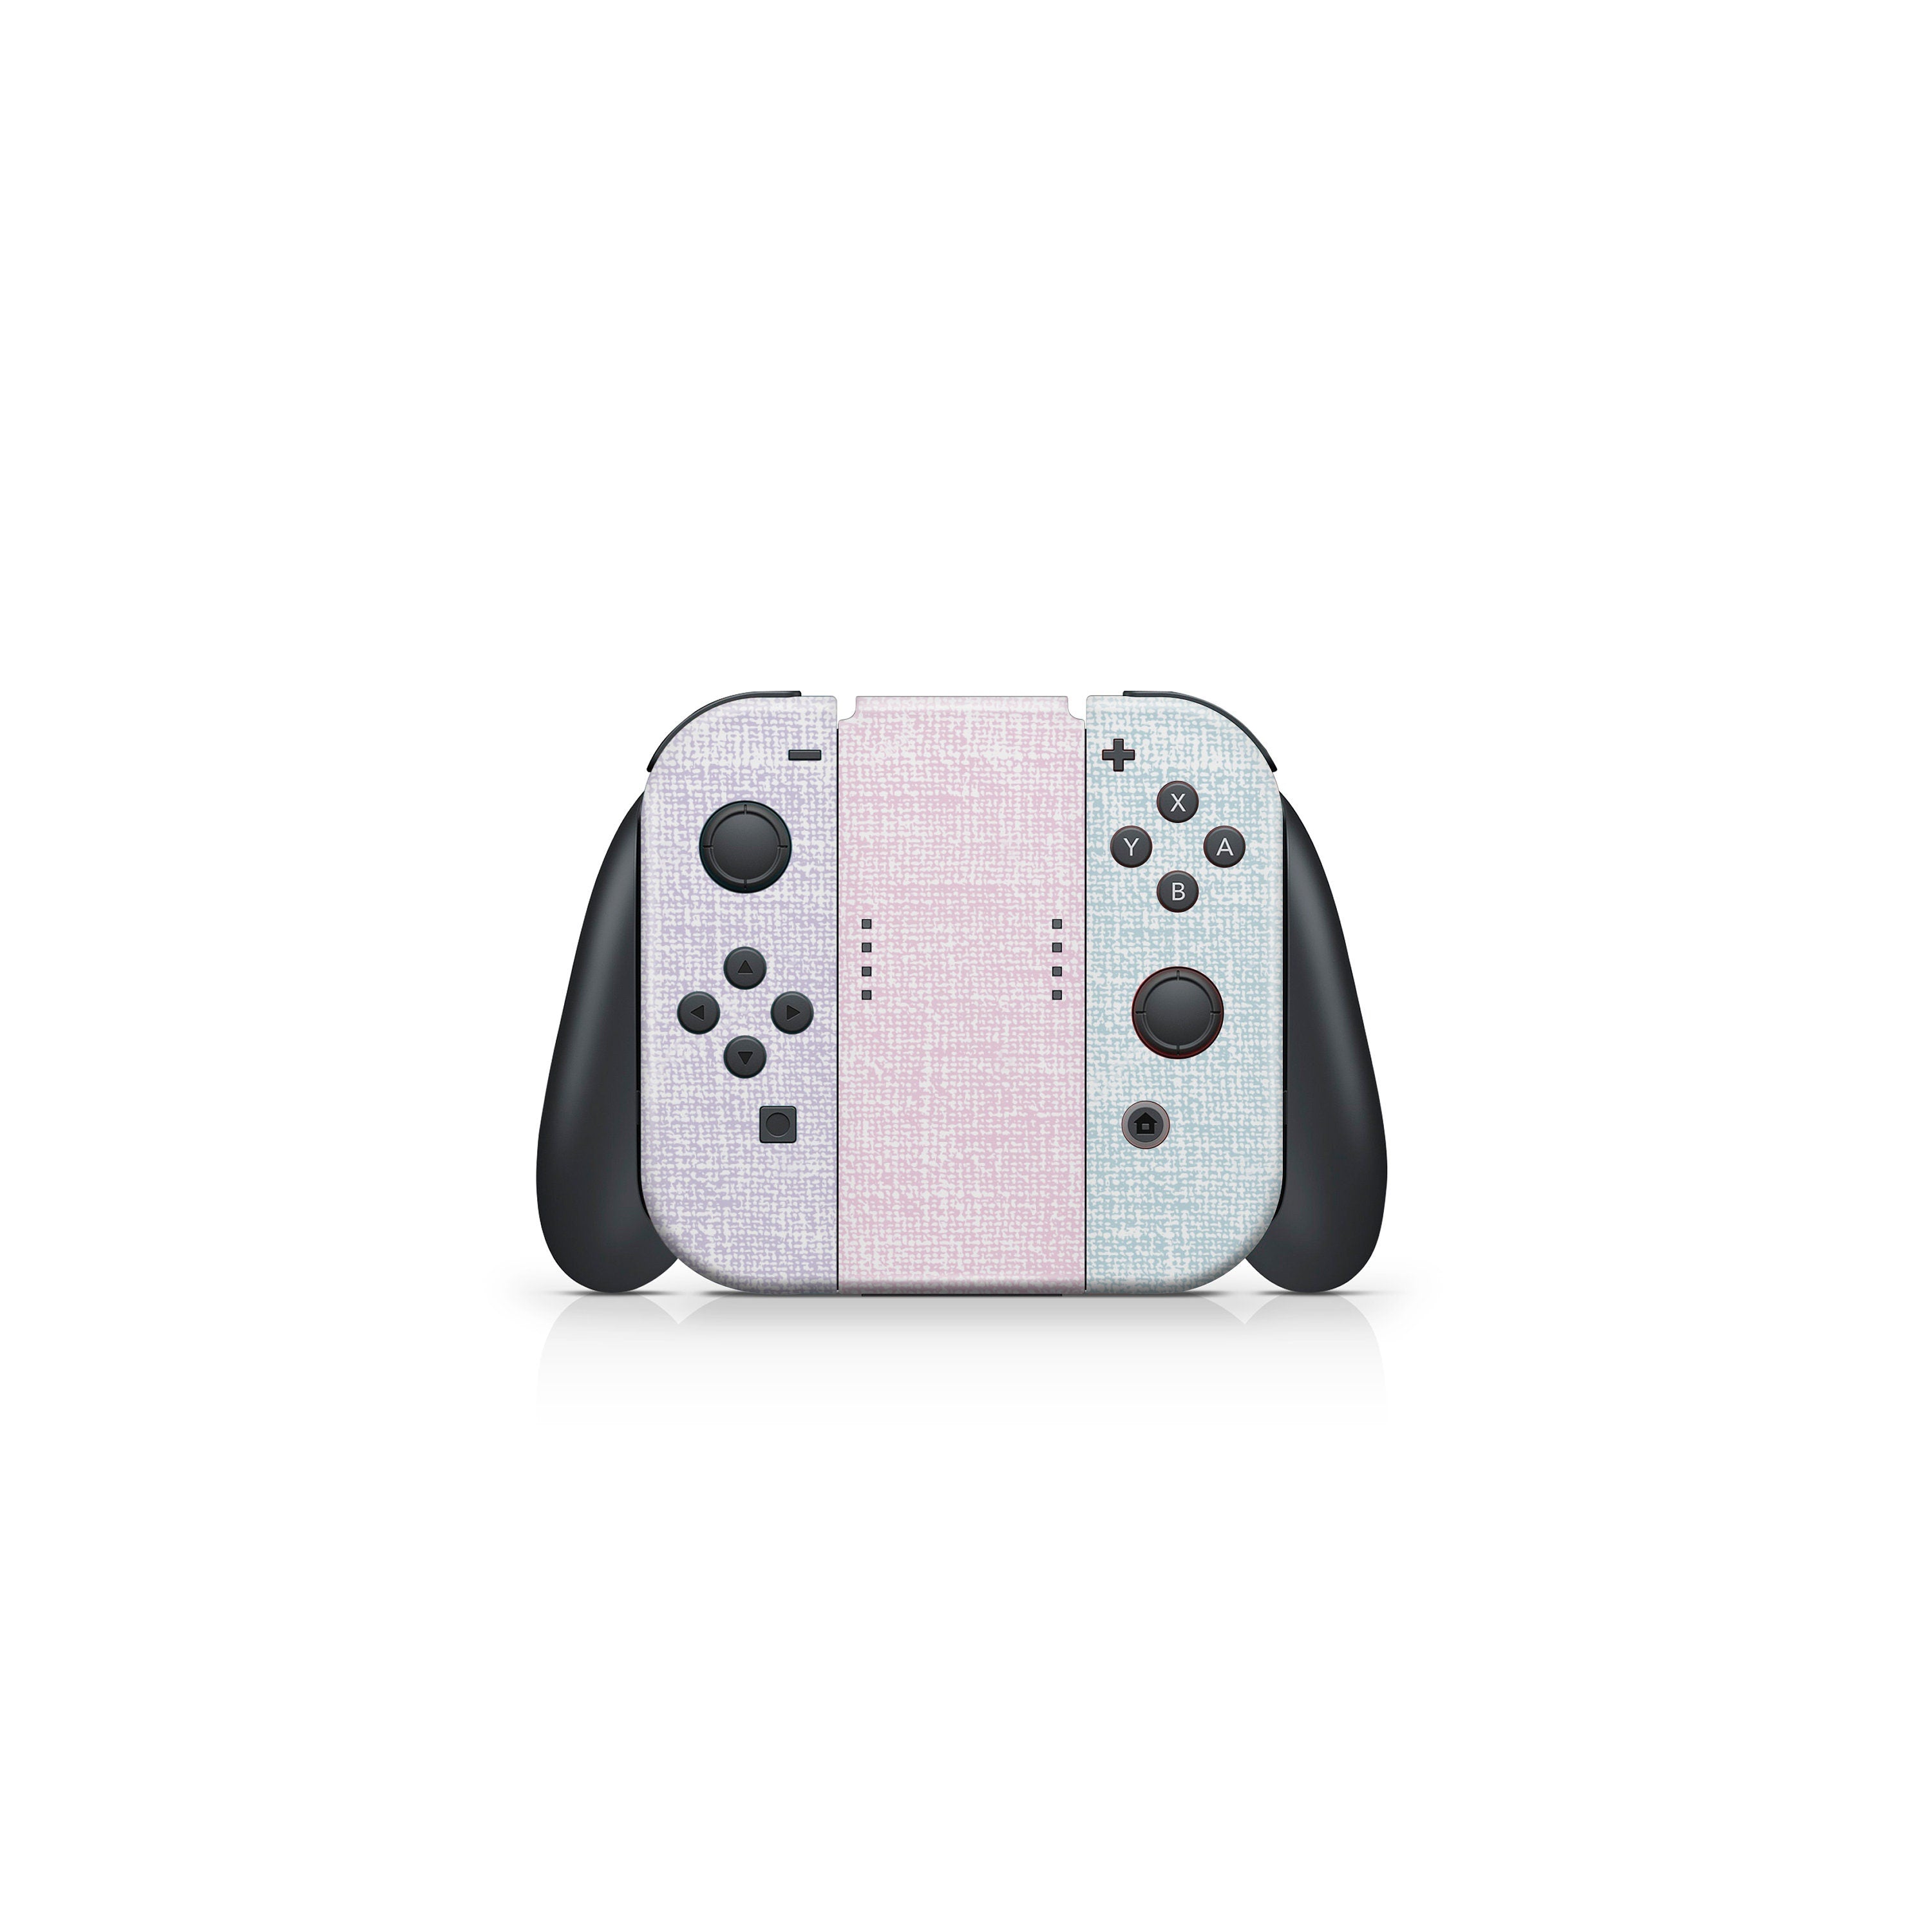 Retro Pastel nintendo switches skin ,Fabric texture Colorwave switch skin Blue & Pink Color Blocking skin Full cover 3m